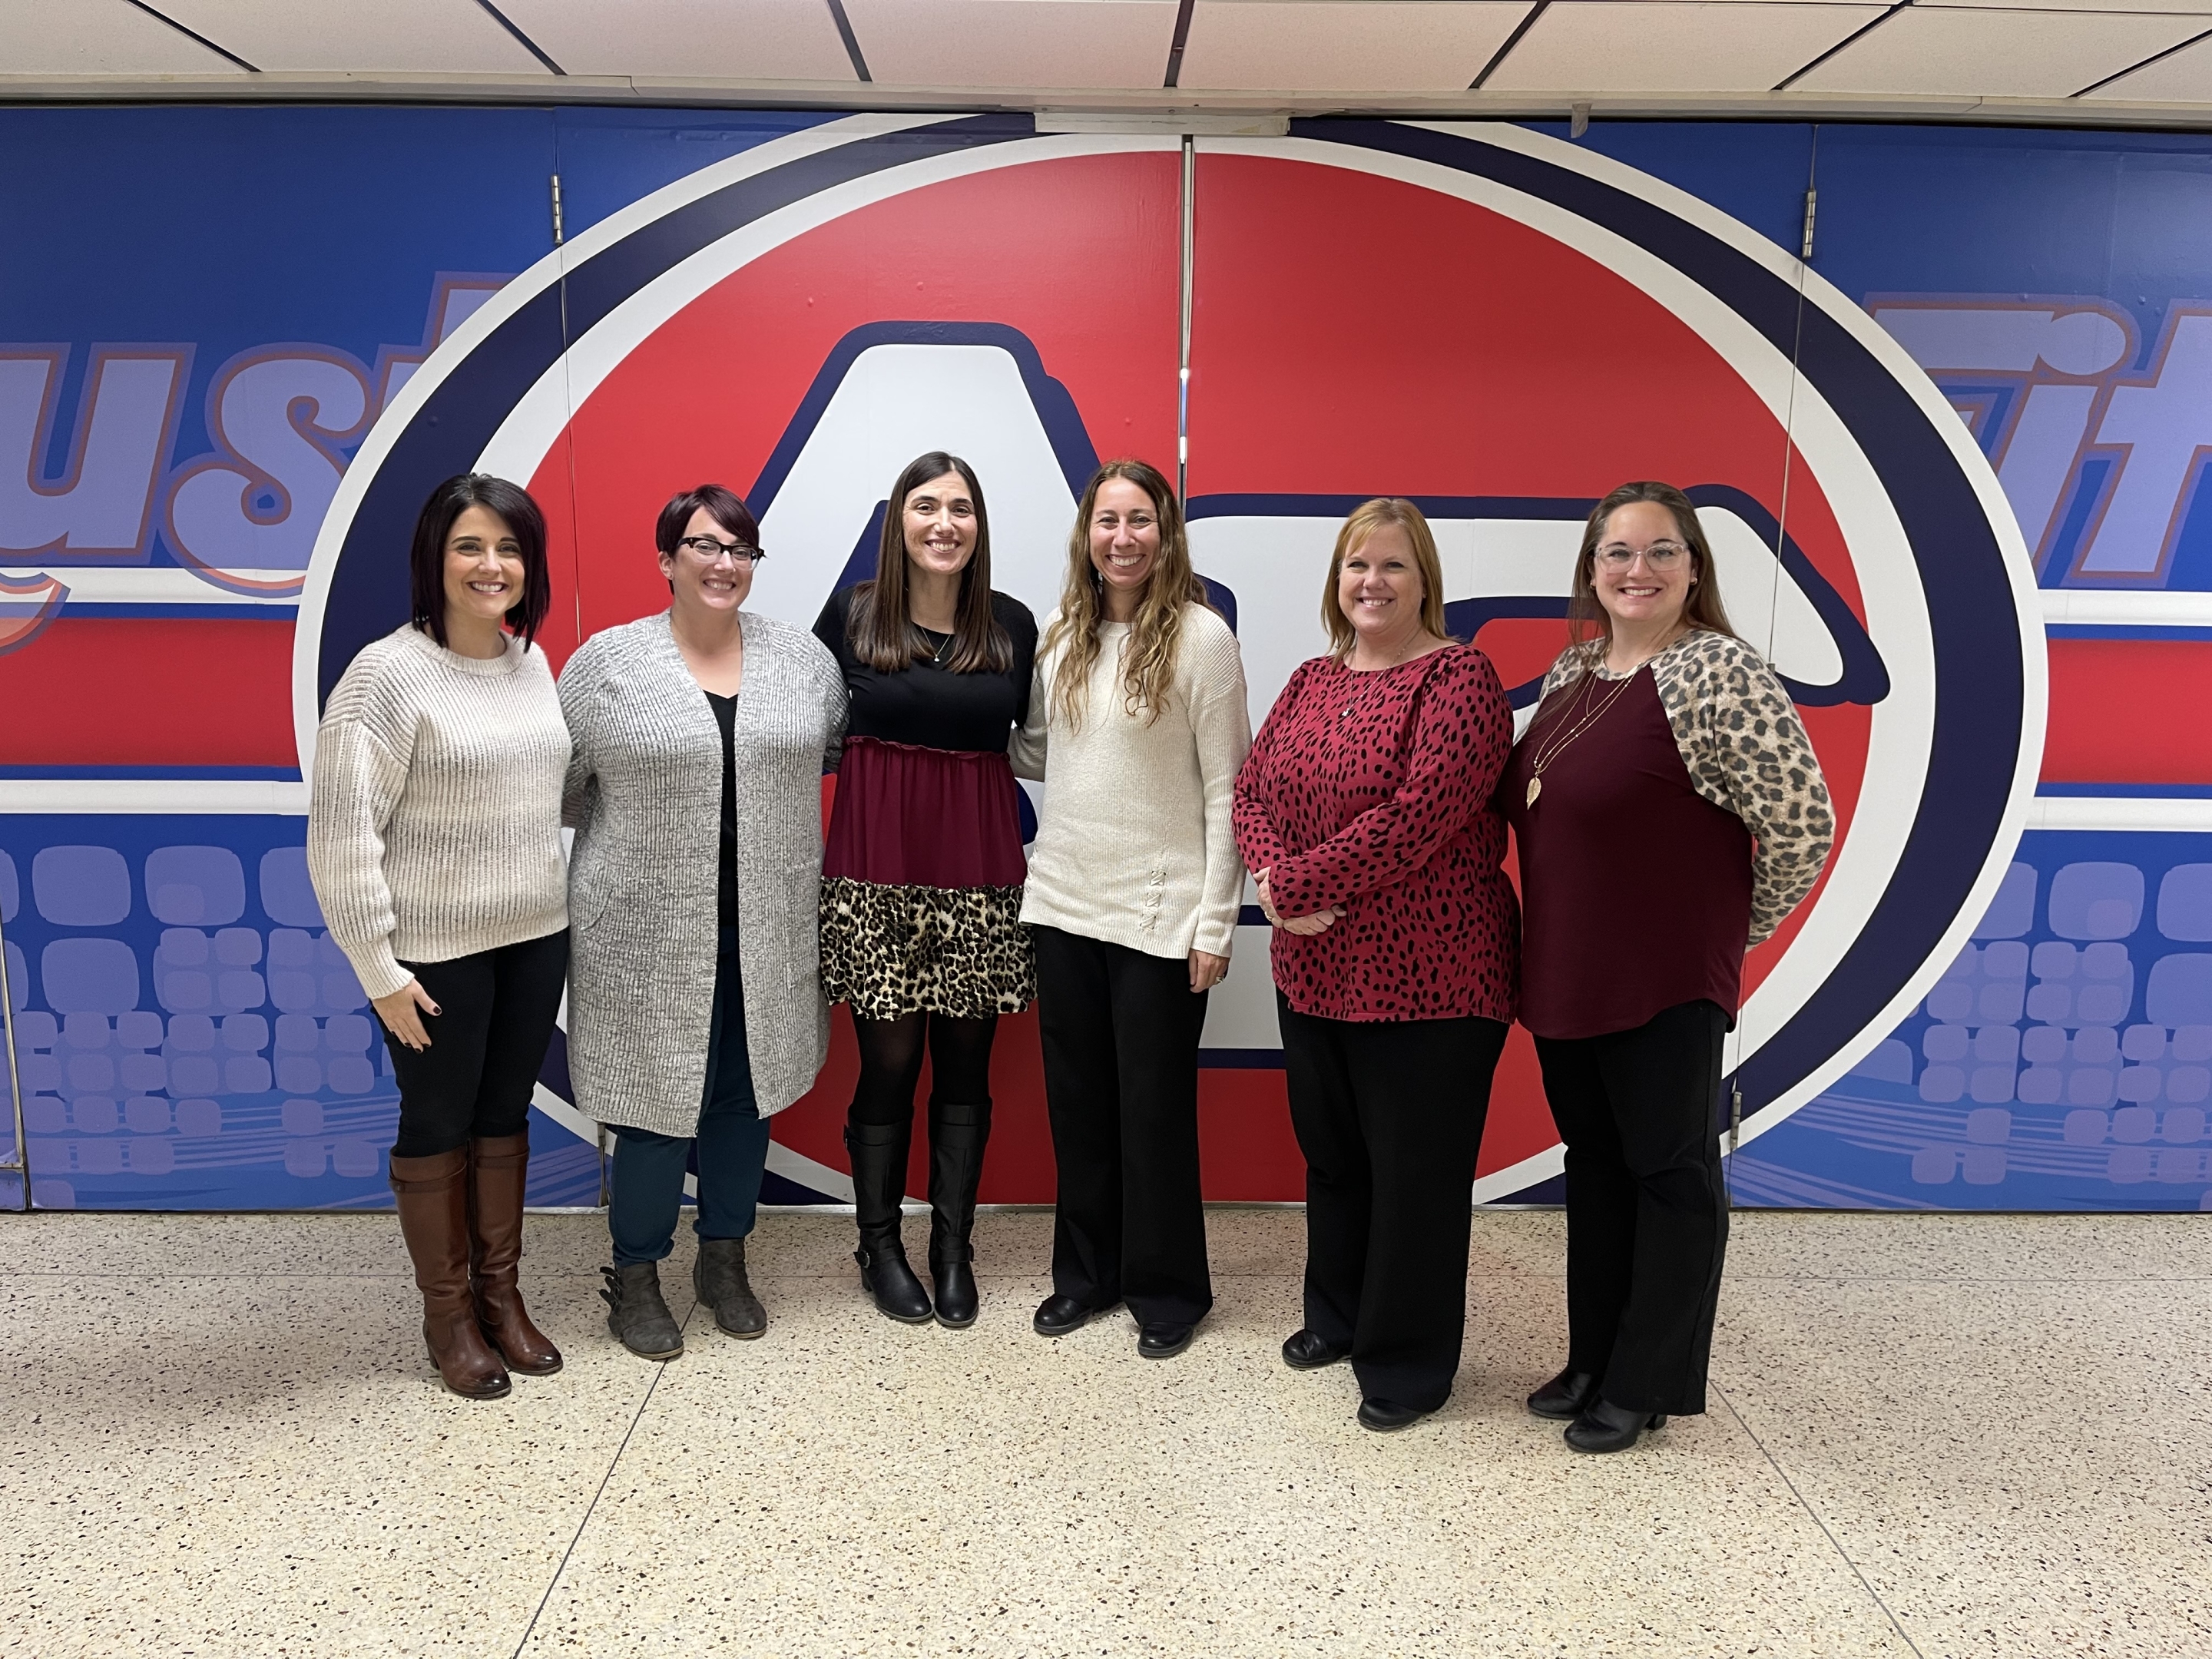 Austintown CCP Instructors smiling in front of Austintown Fitch High School mural